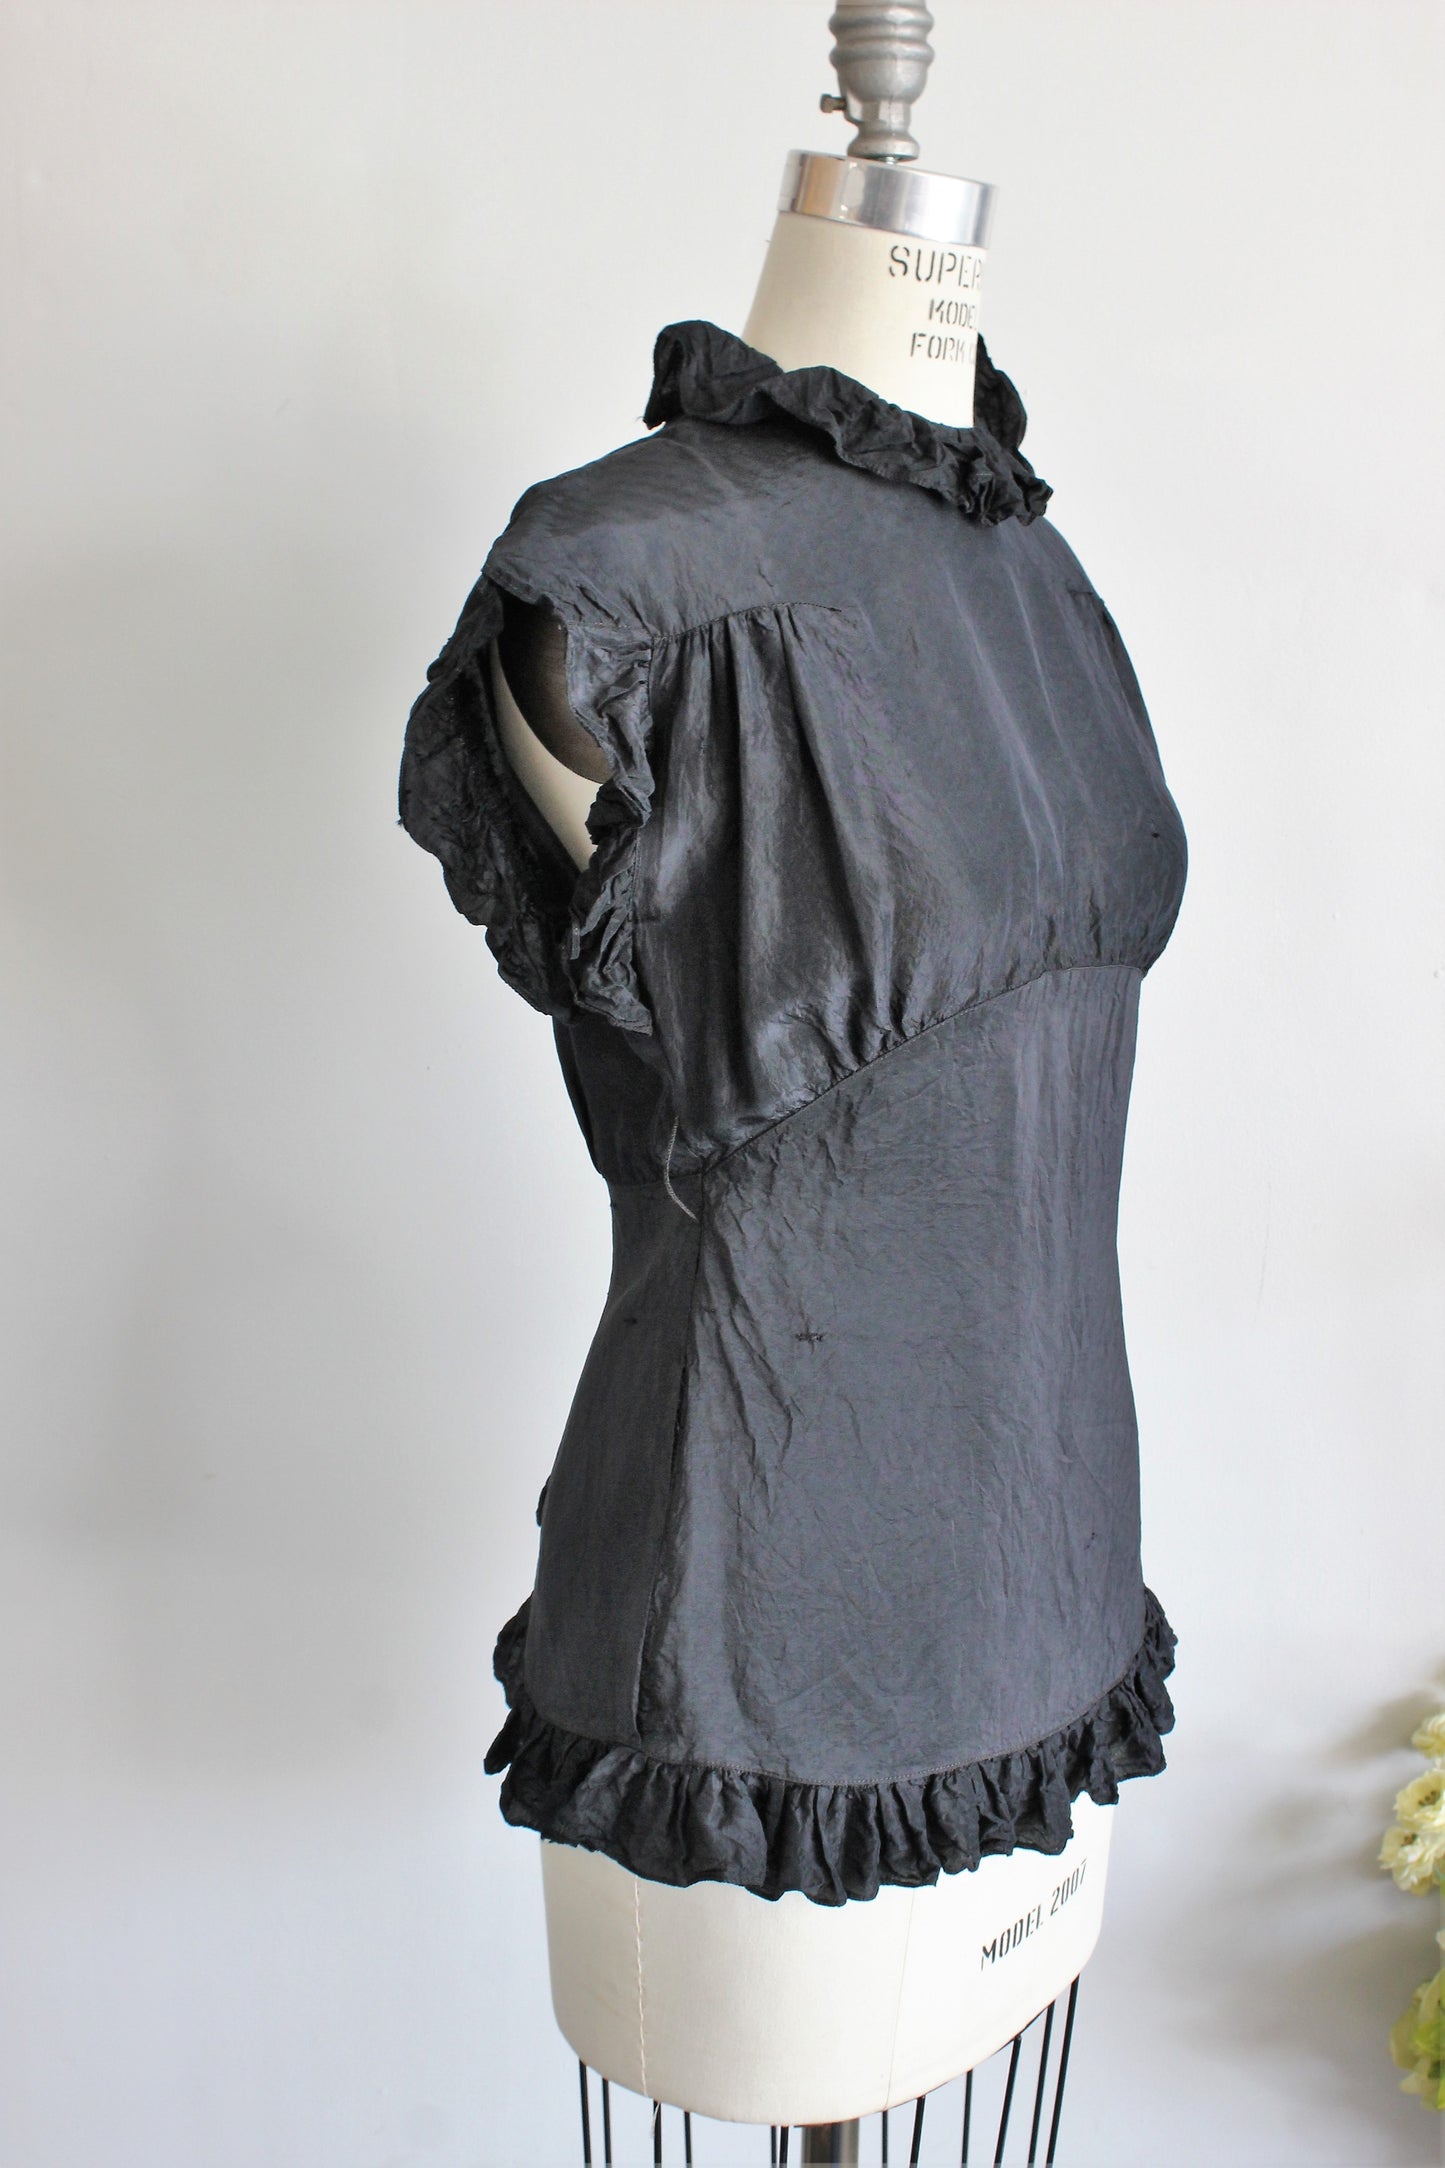 Vintage 1930s 1940s Black Rayon Blouse with Keyhole Back